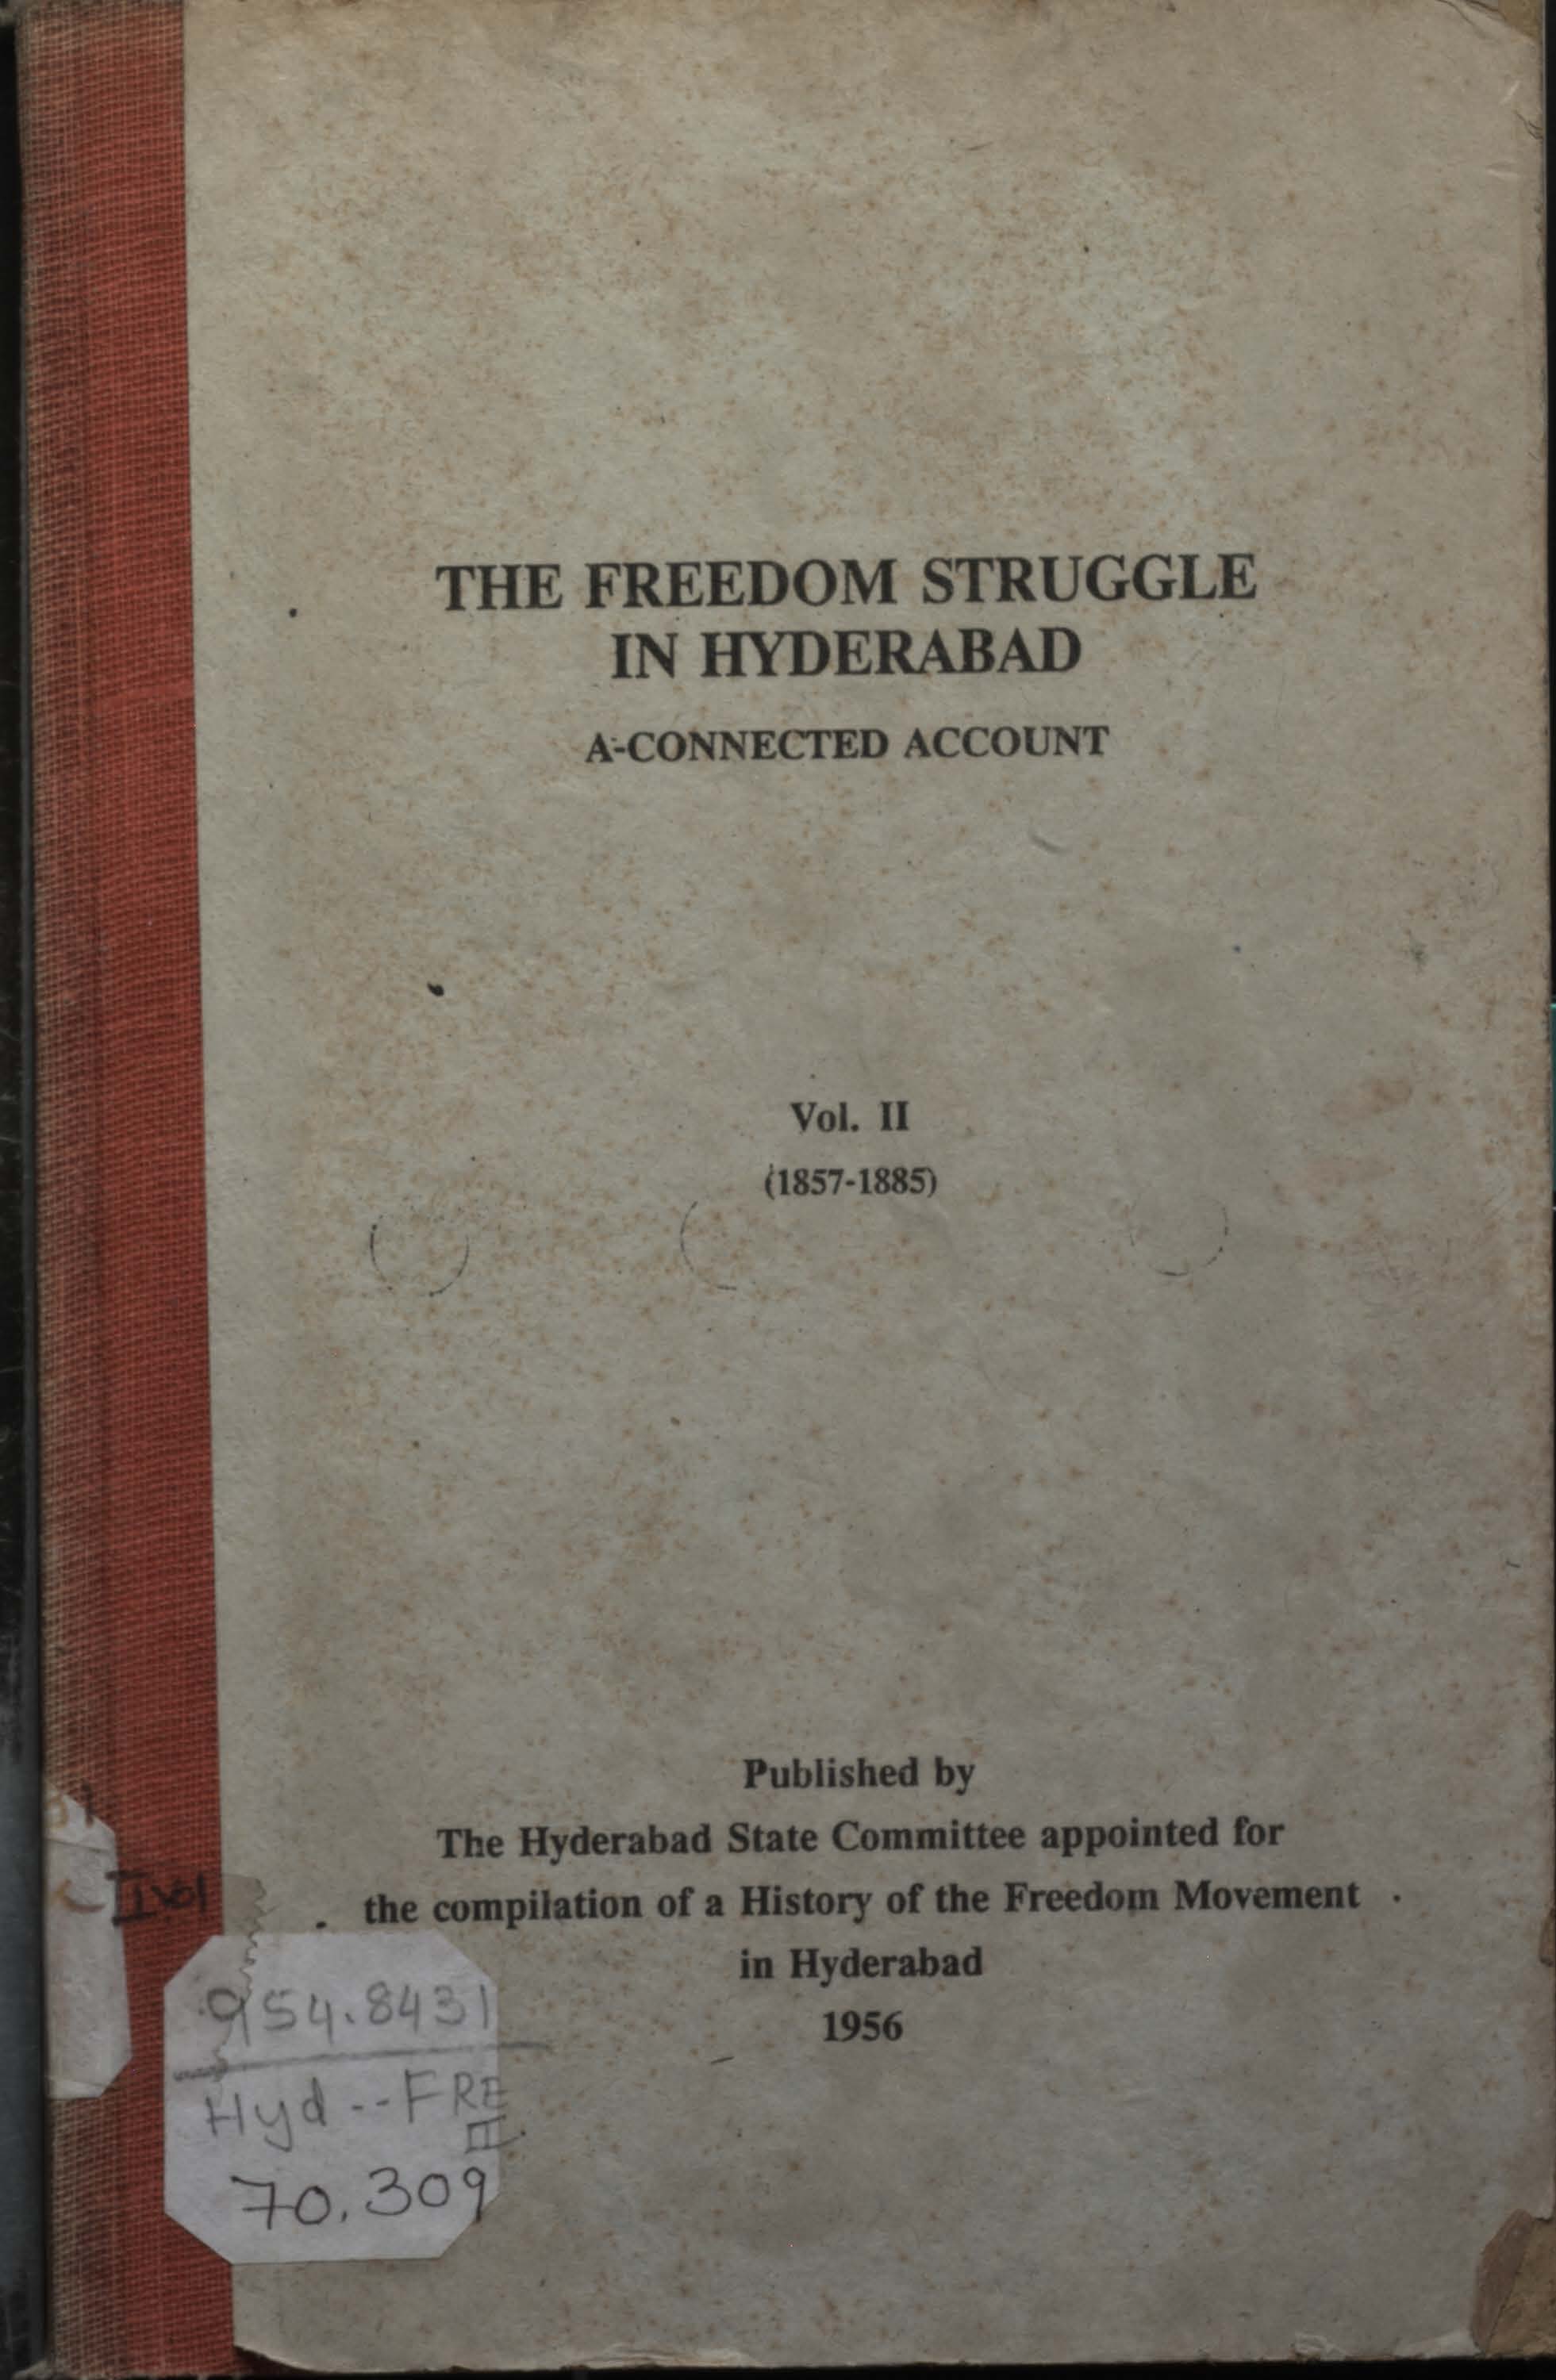 The Freedom Struggle in Hyderabad A-connected Account Vol - II (1857-1885)